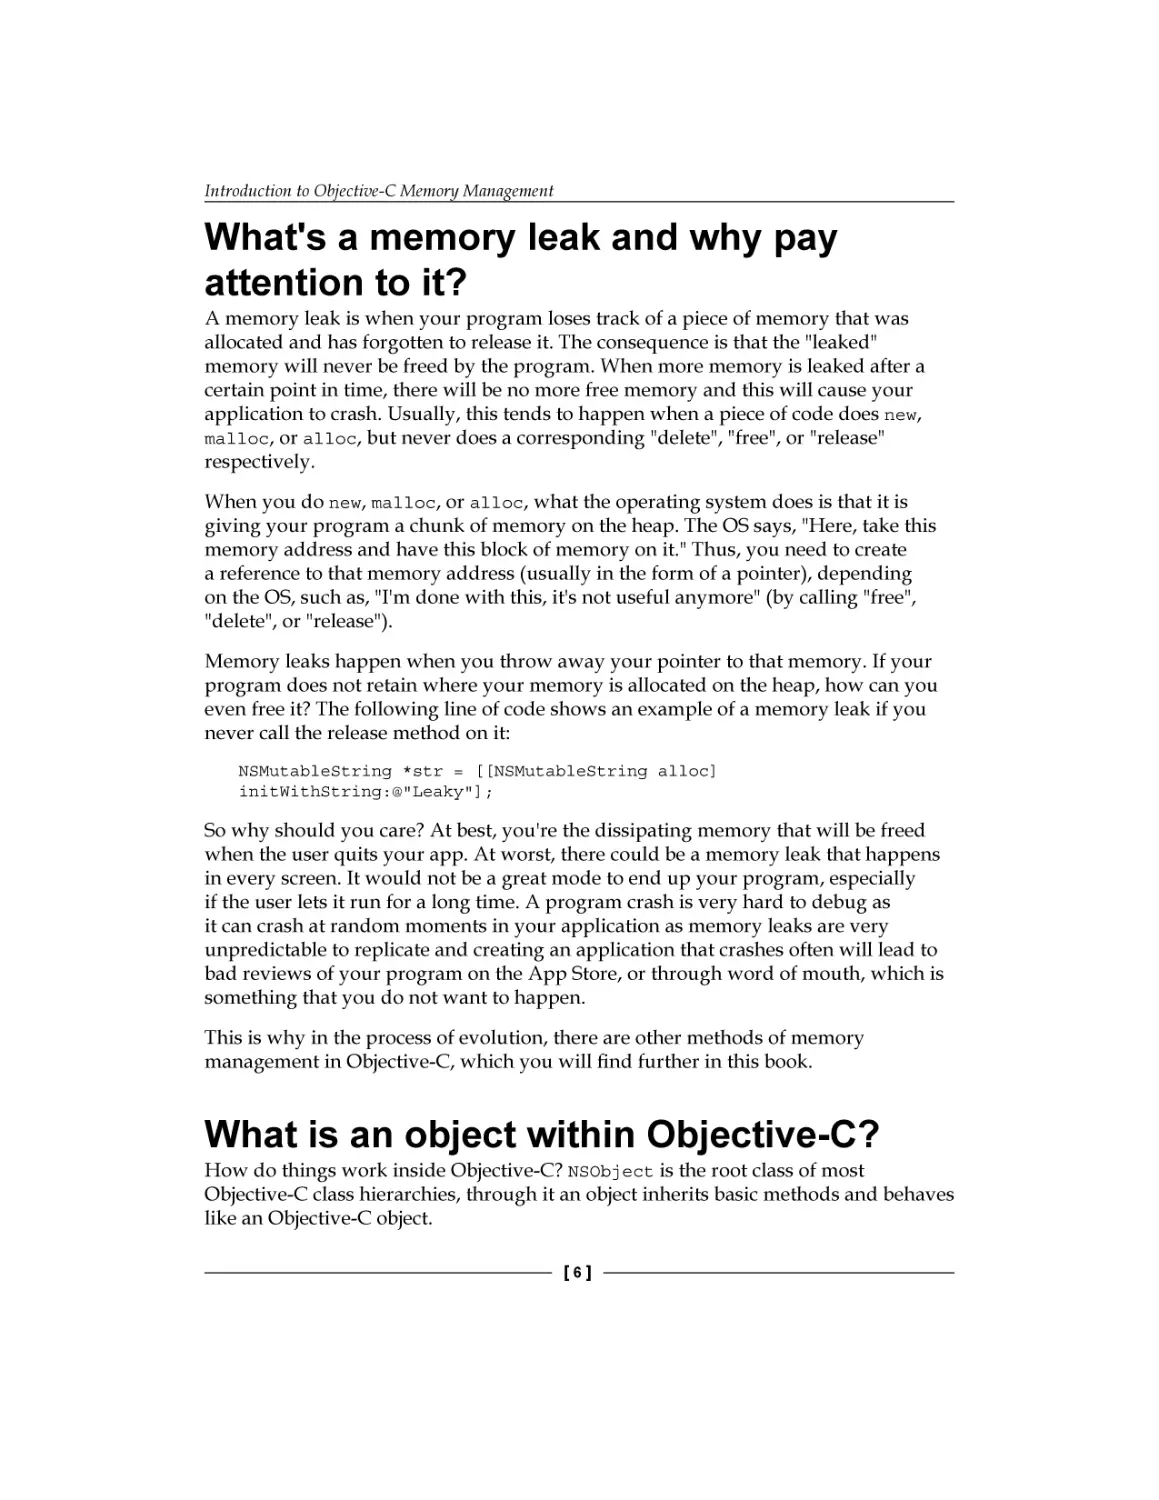 What's a memory leak and why pay attention to it?
What is an Object within Objective-C?